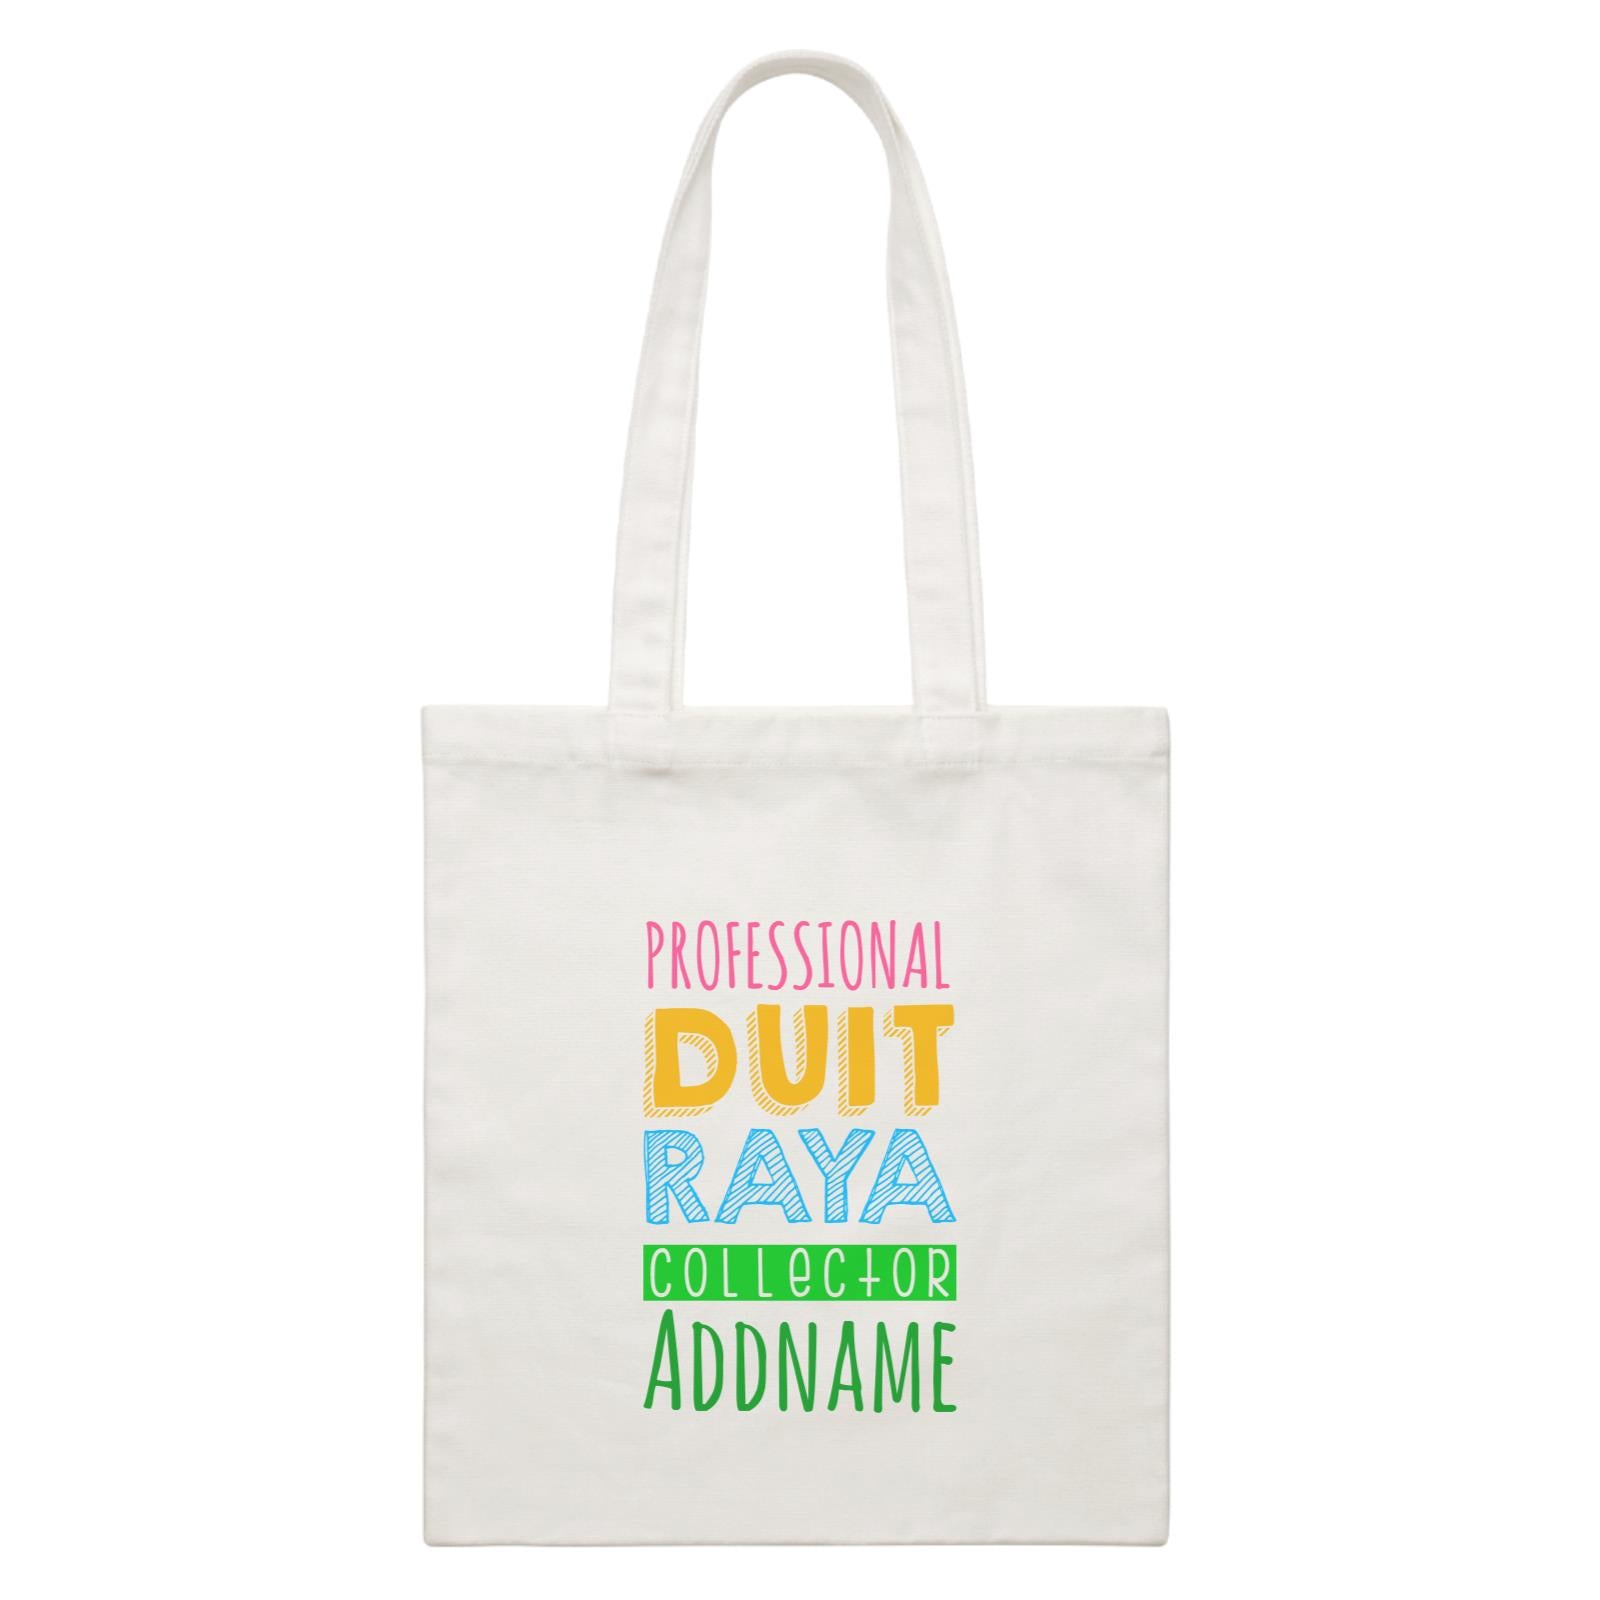 Professional Duit Raya Collector Canvas Bag  Personalizable Designs